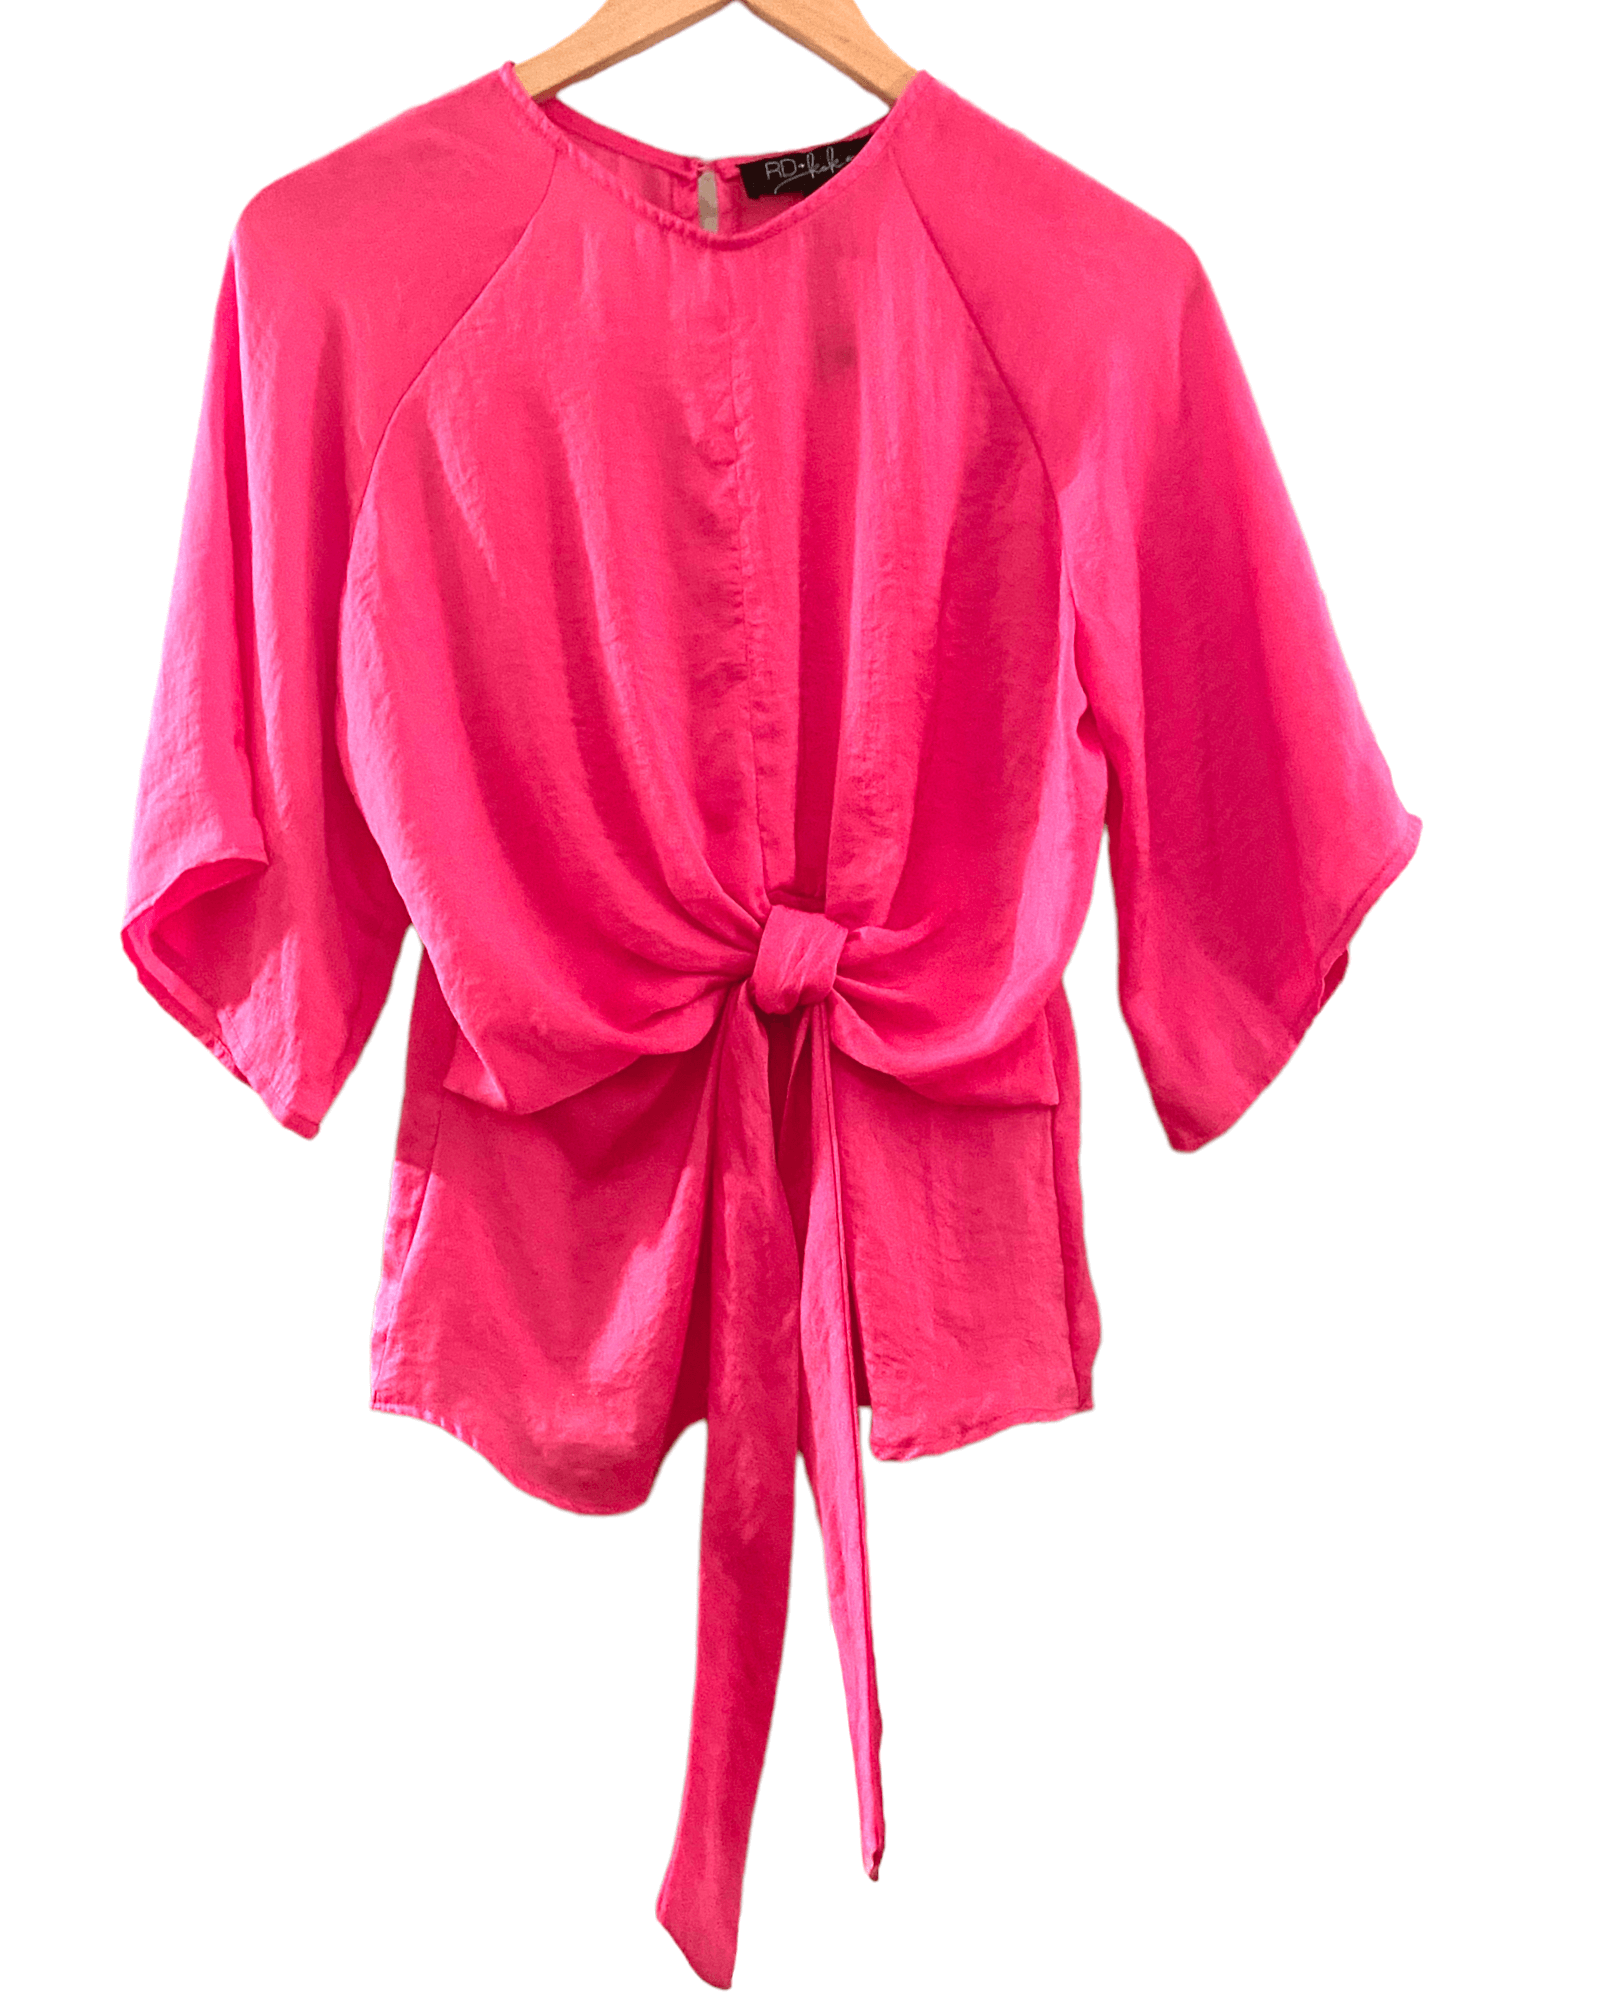 Light Summer RD and KOKO taffy pink satin tie front blouse top